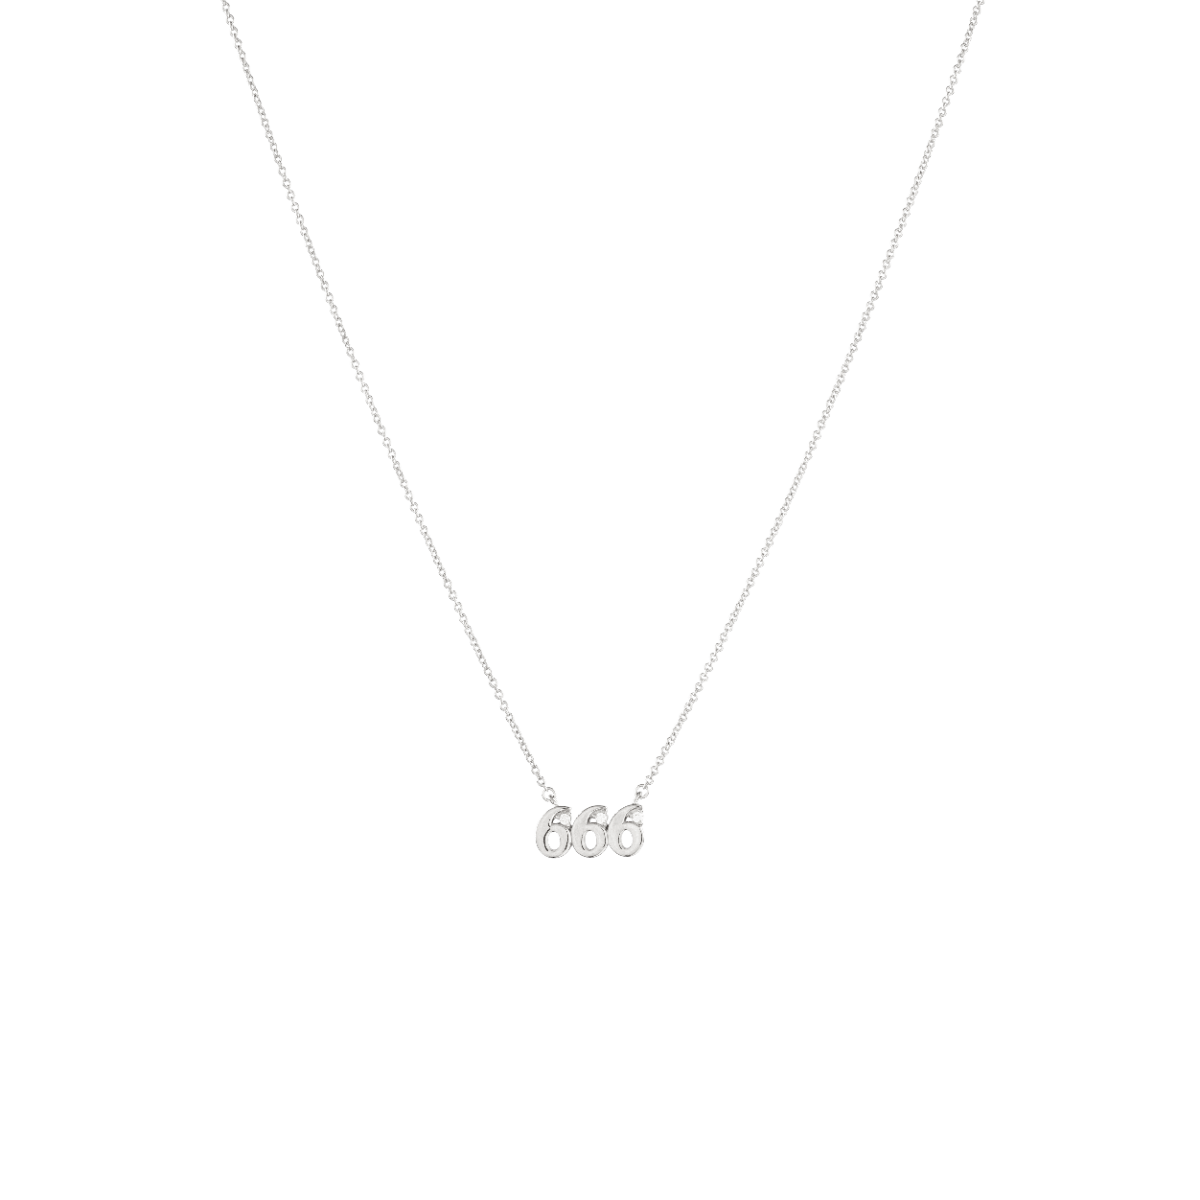 666 - Reflect Necklace